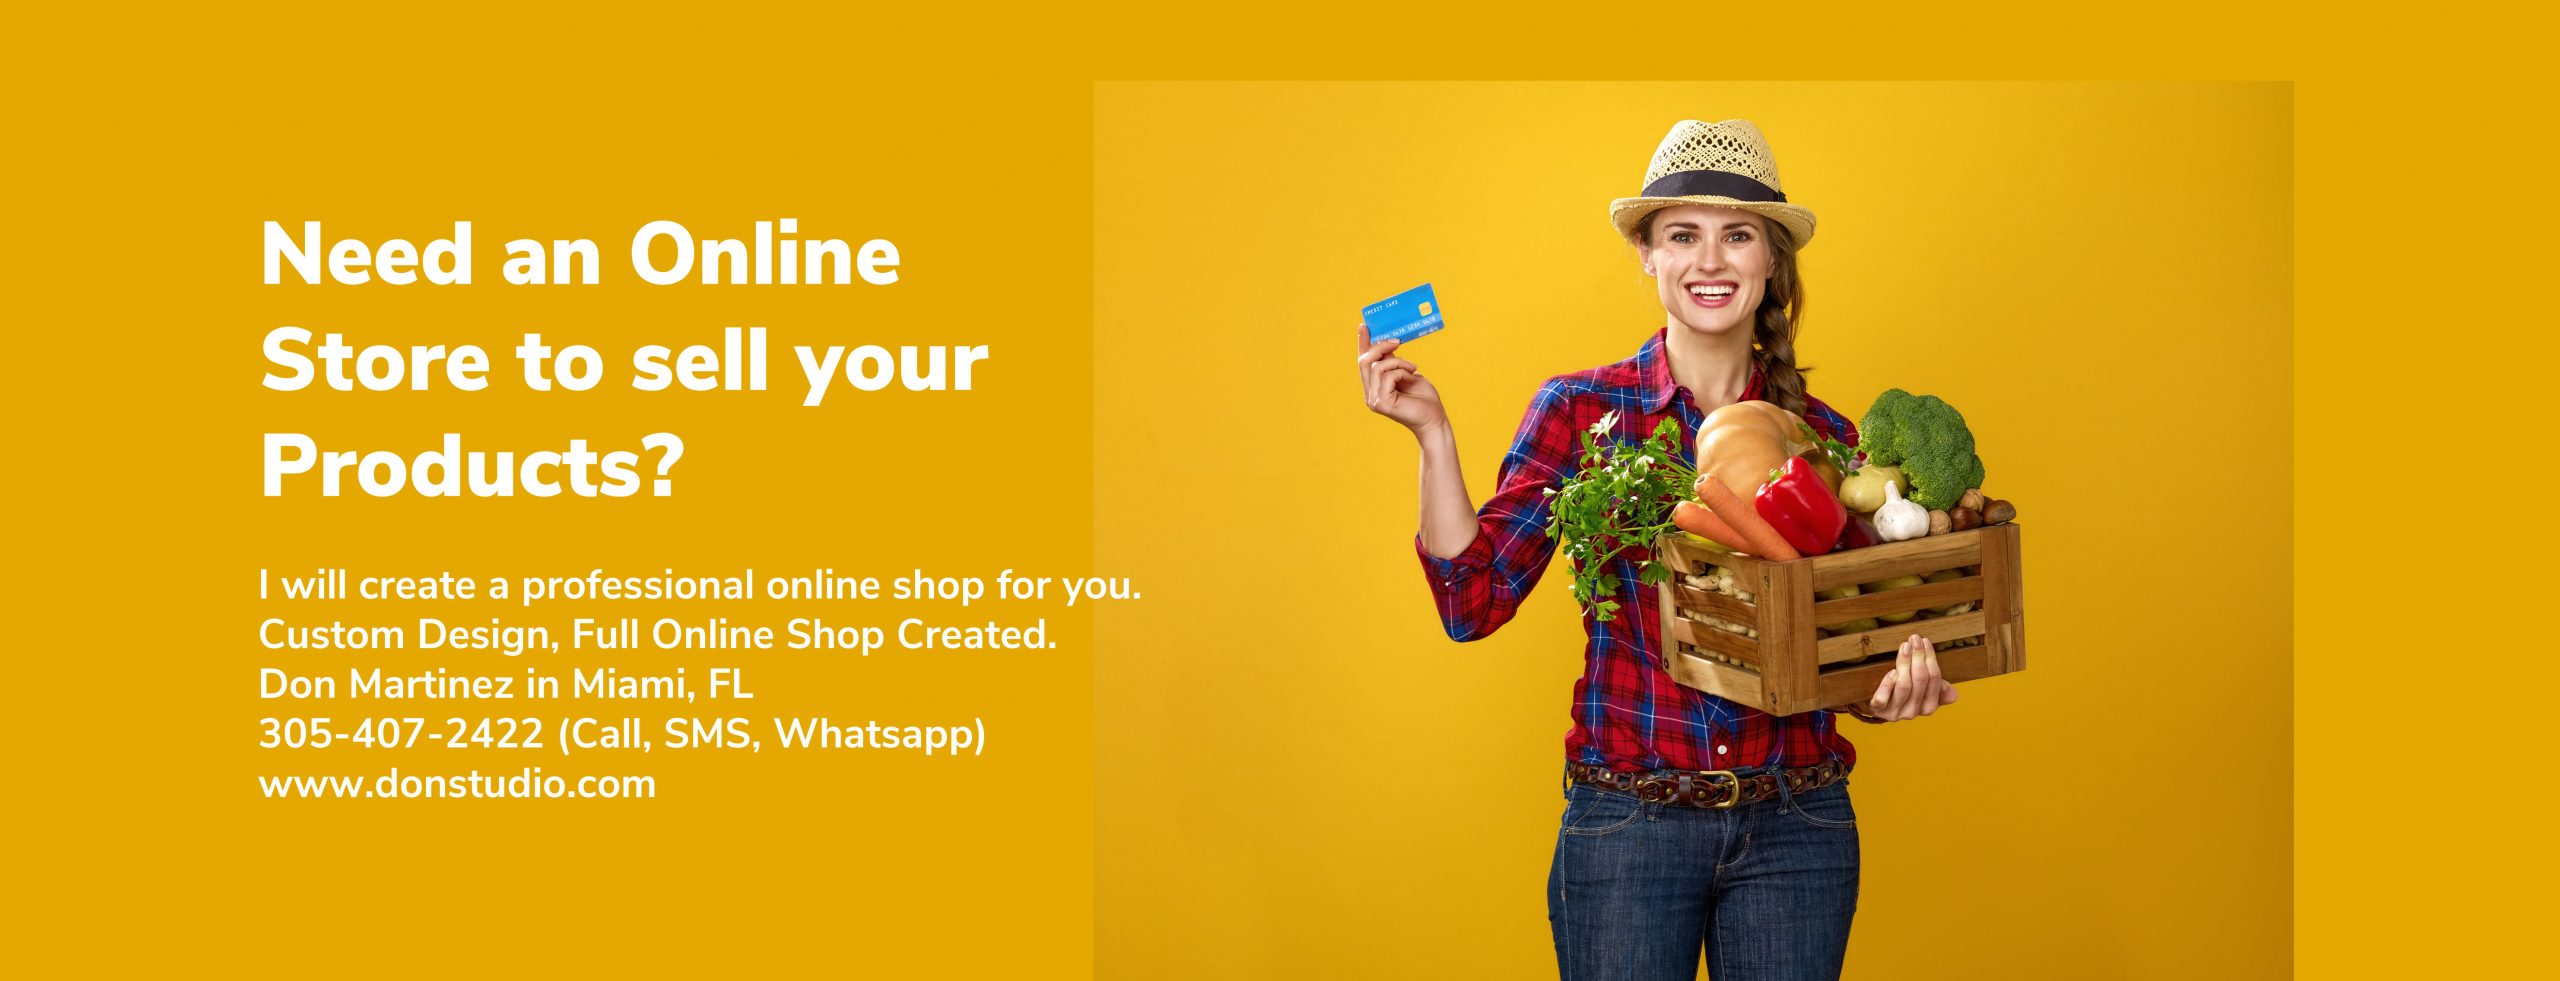 fresh vegetables online store ad scaled